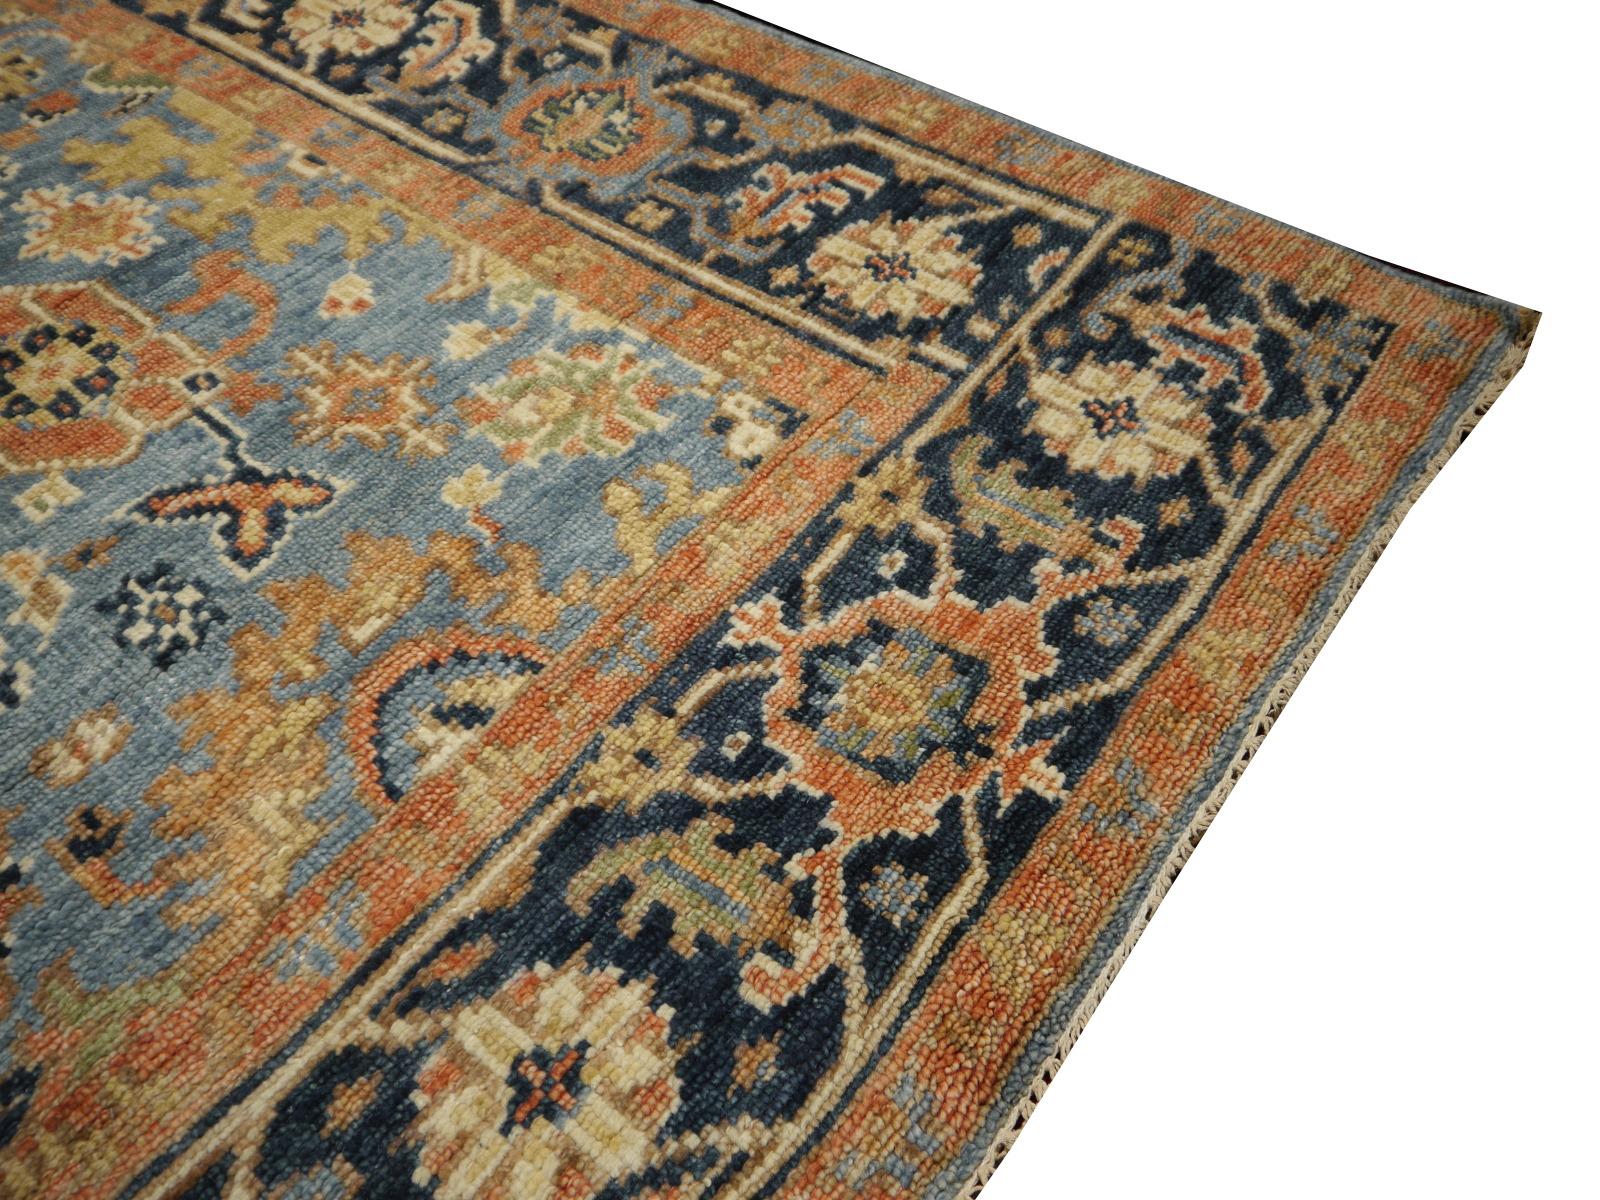 Hand-Knotted Heriz Rug hand-knotted low wool pile vintage look 8 x 10 ft from India For Sale